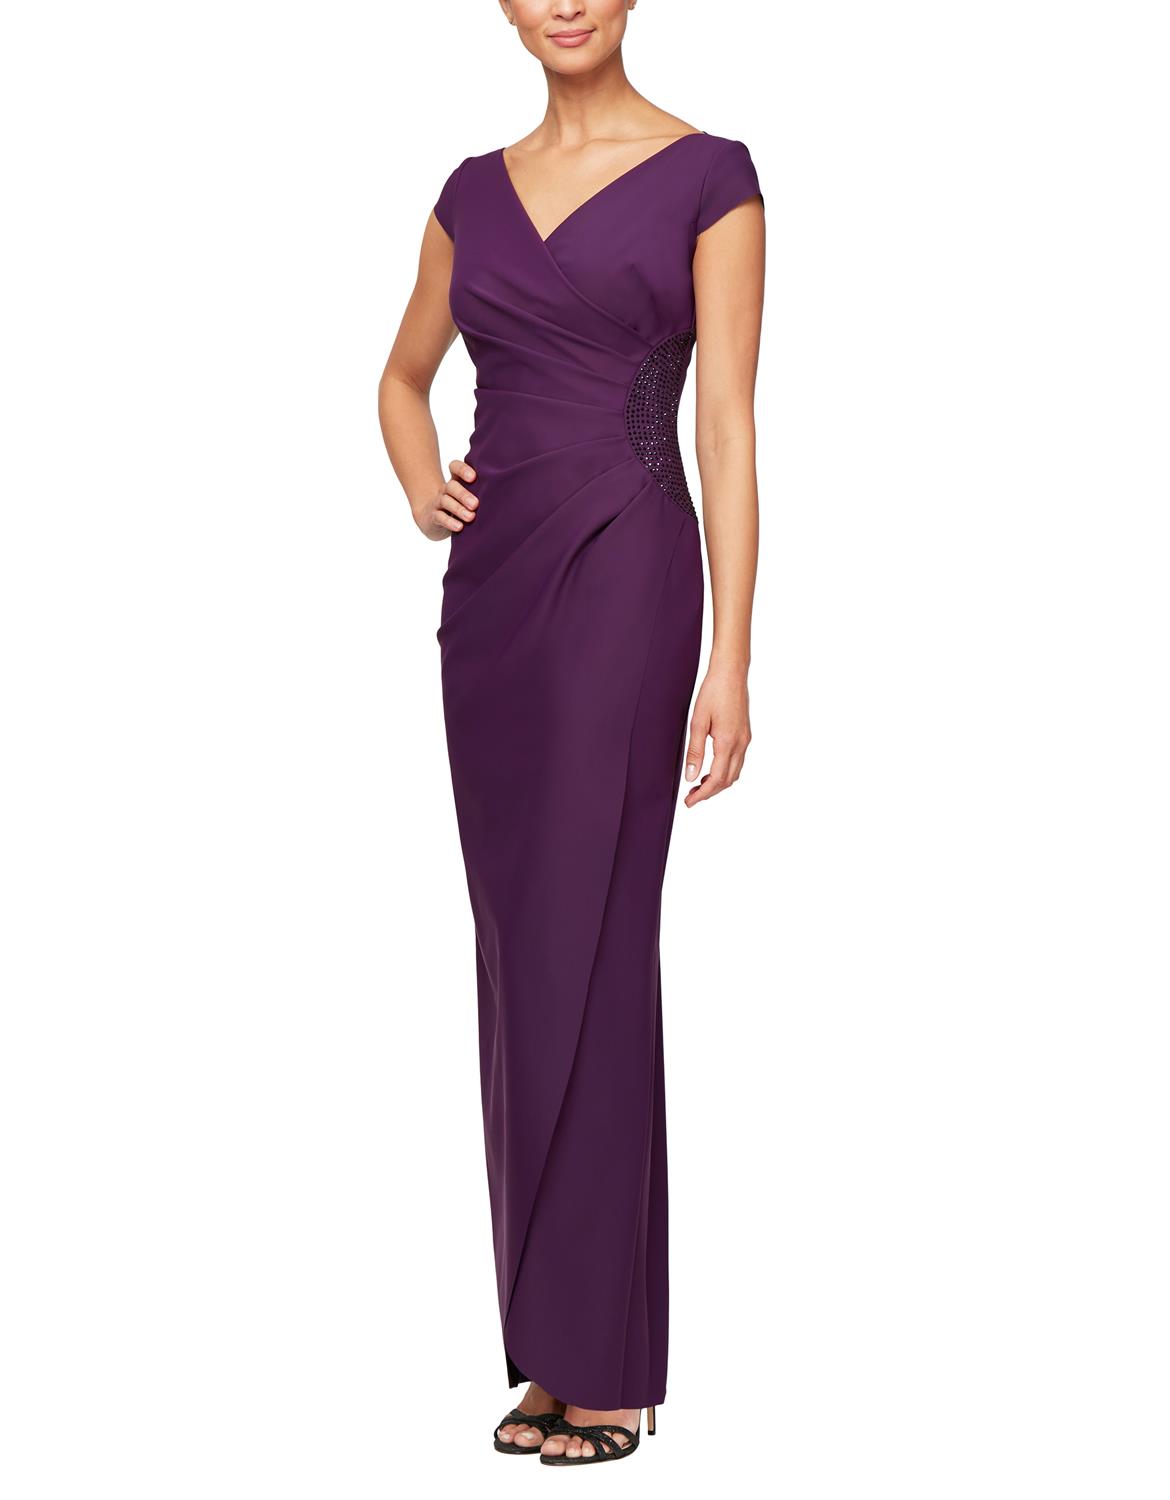 Lord Taylor Evening Dresses,Lord and Taylor Dresses for Women ,Lord and  Taylor Mother of Bride Dresses,Lord Tayl…